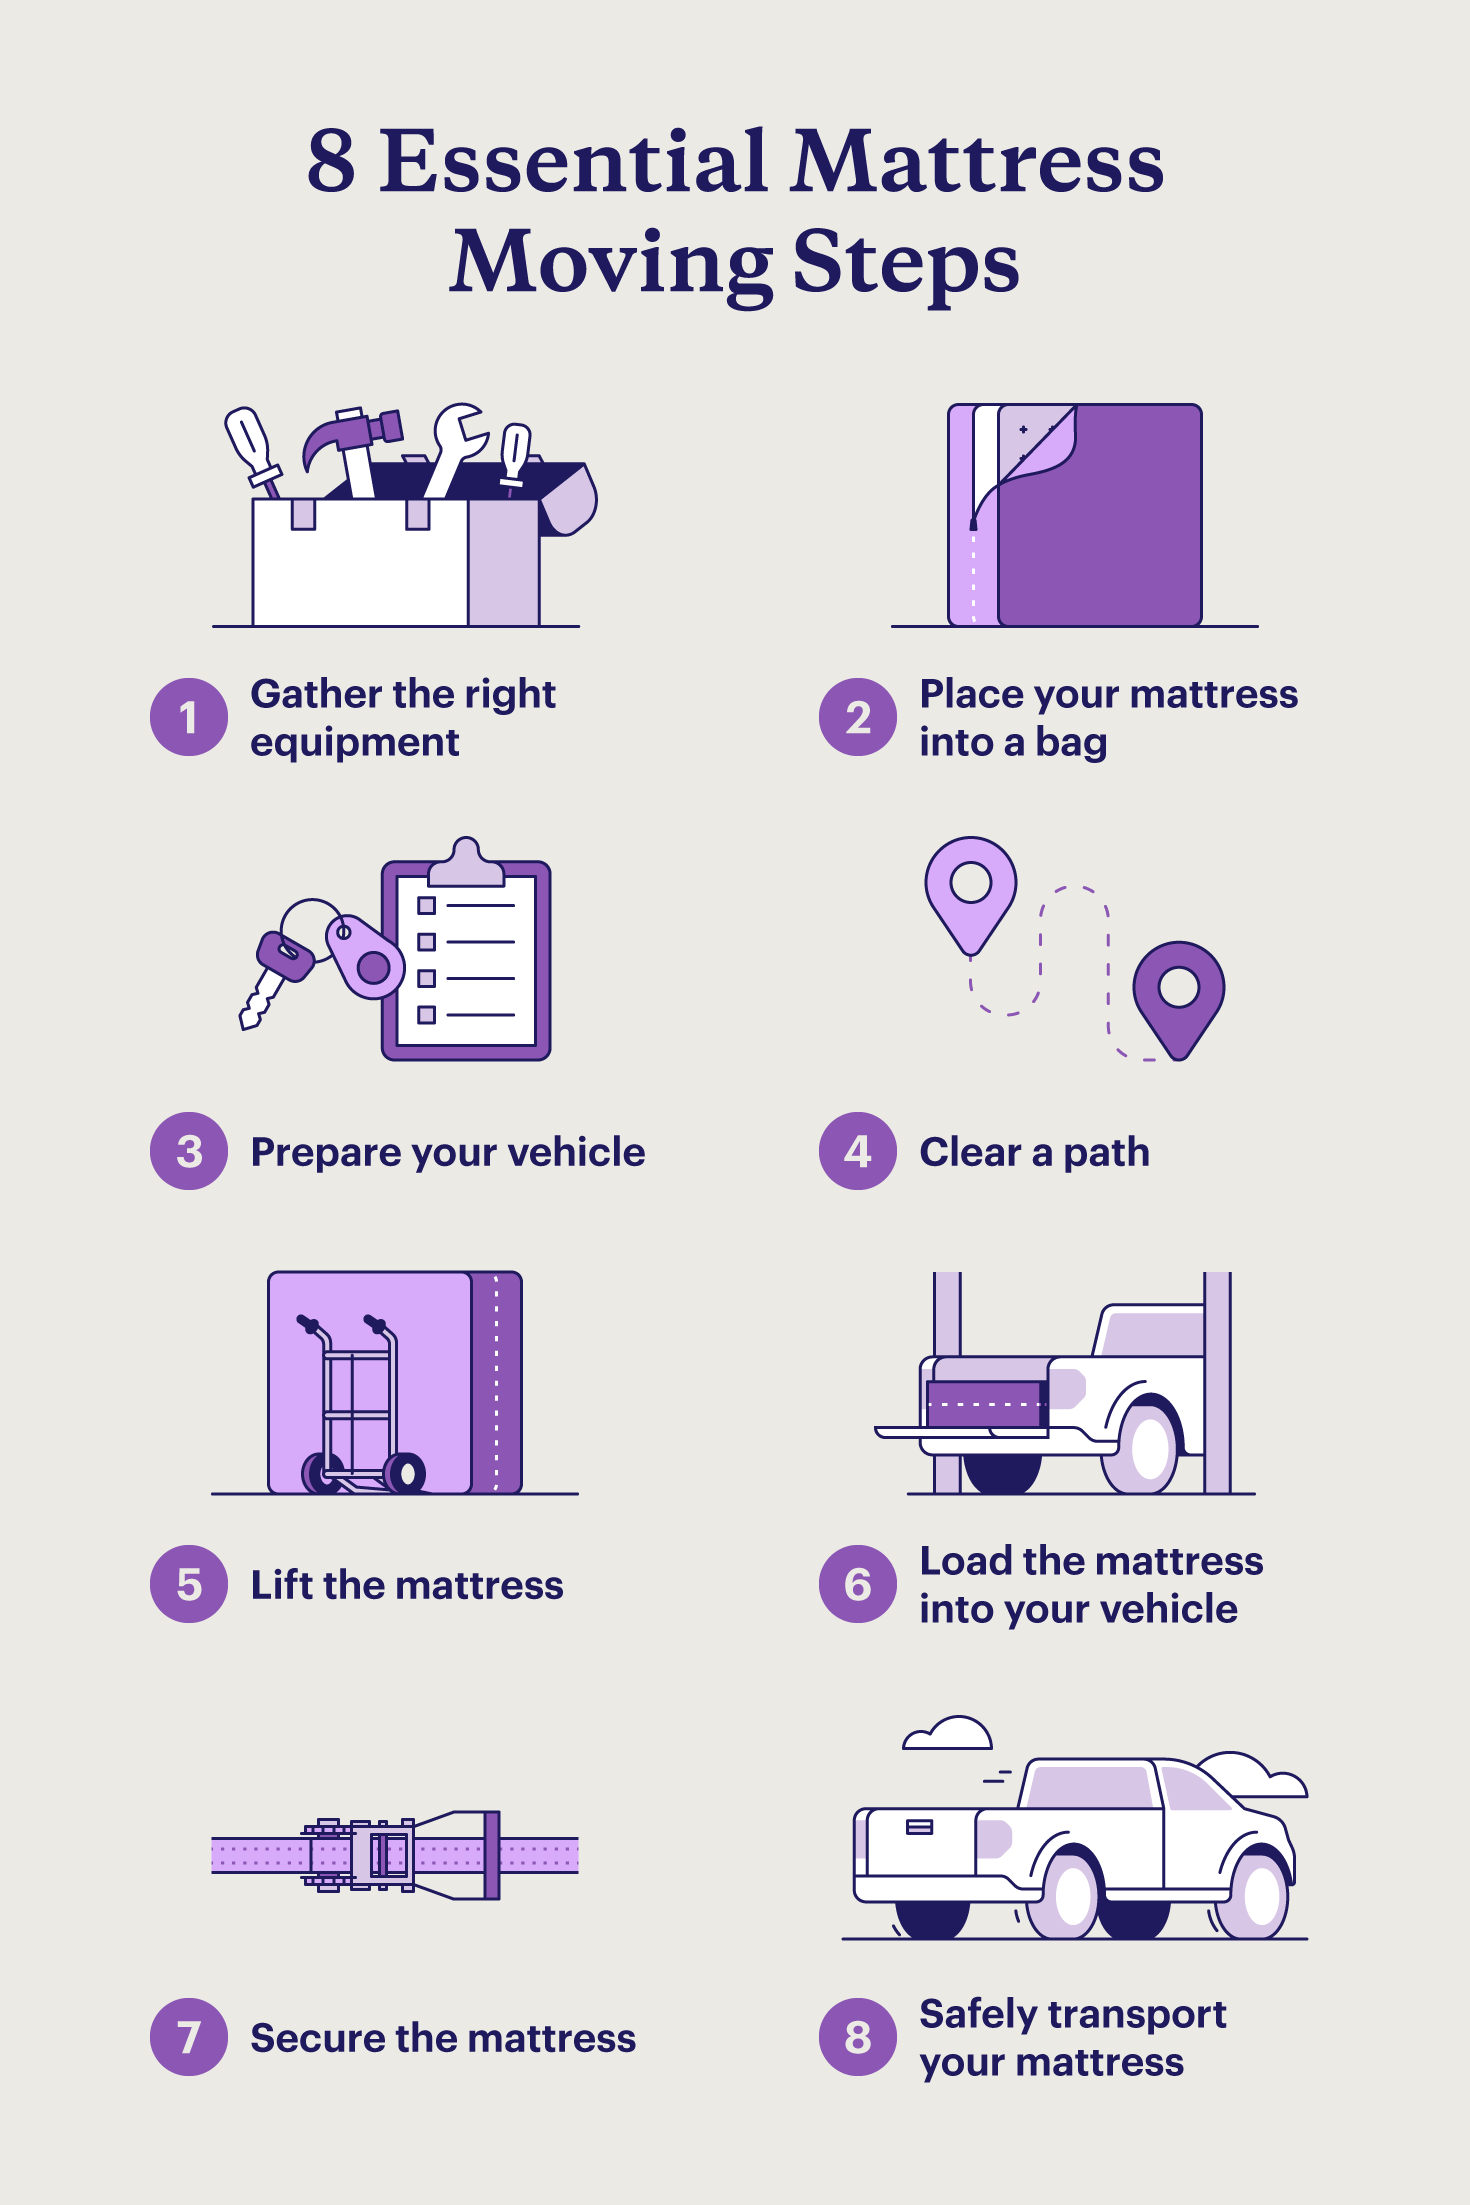 How to move a mattress in 8 steps, including gathering equipment, preparing your vehicle, and securing the mattress.